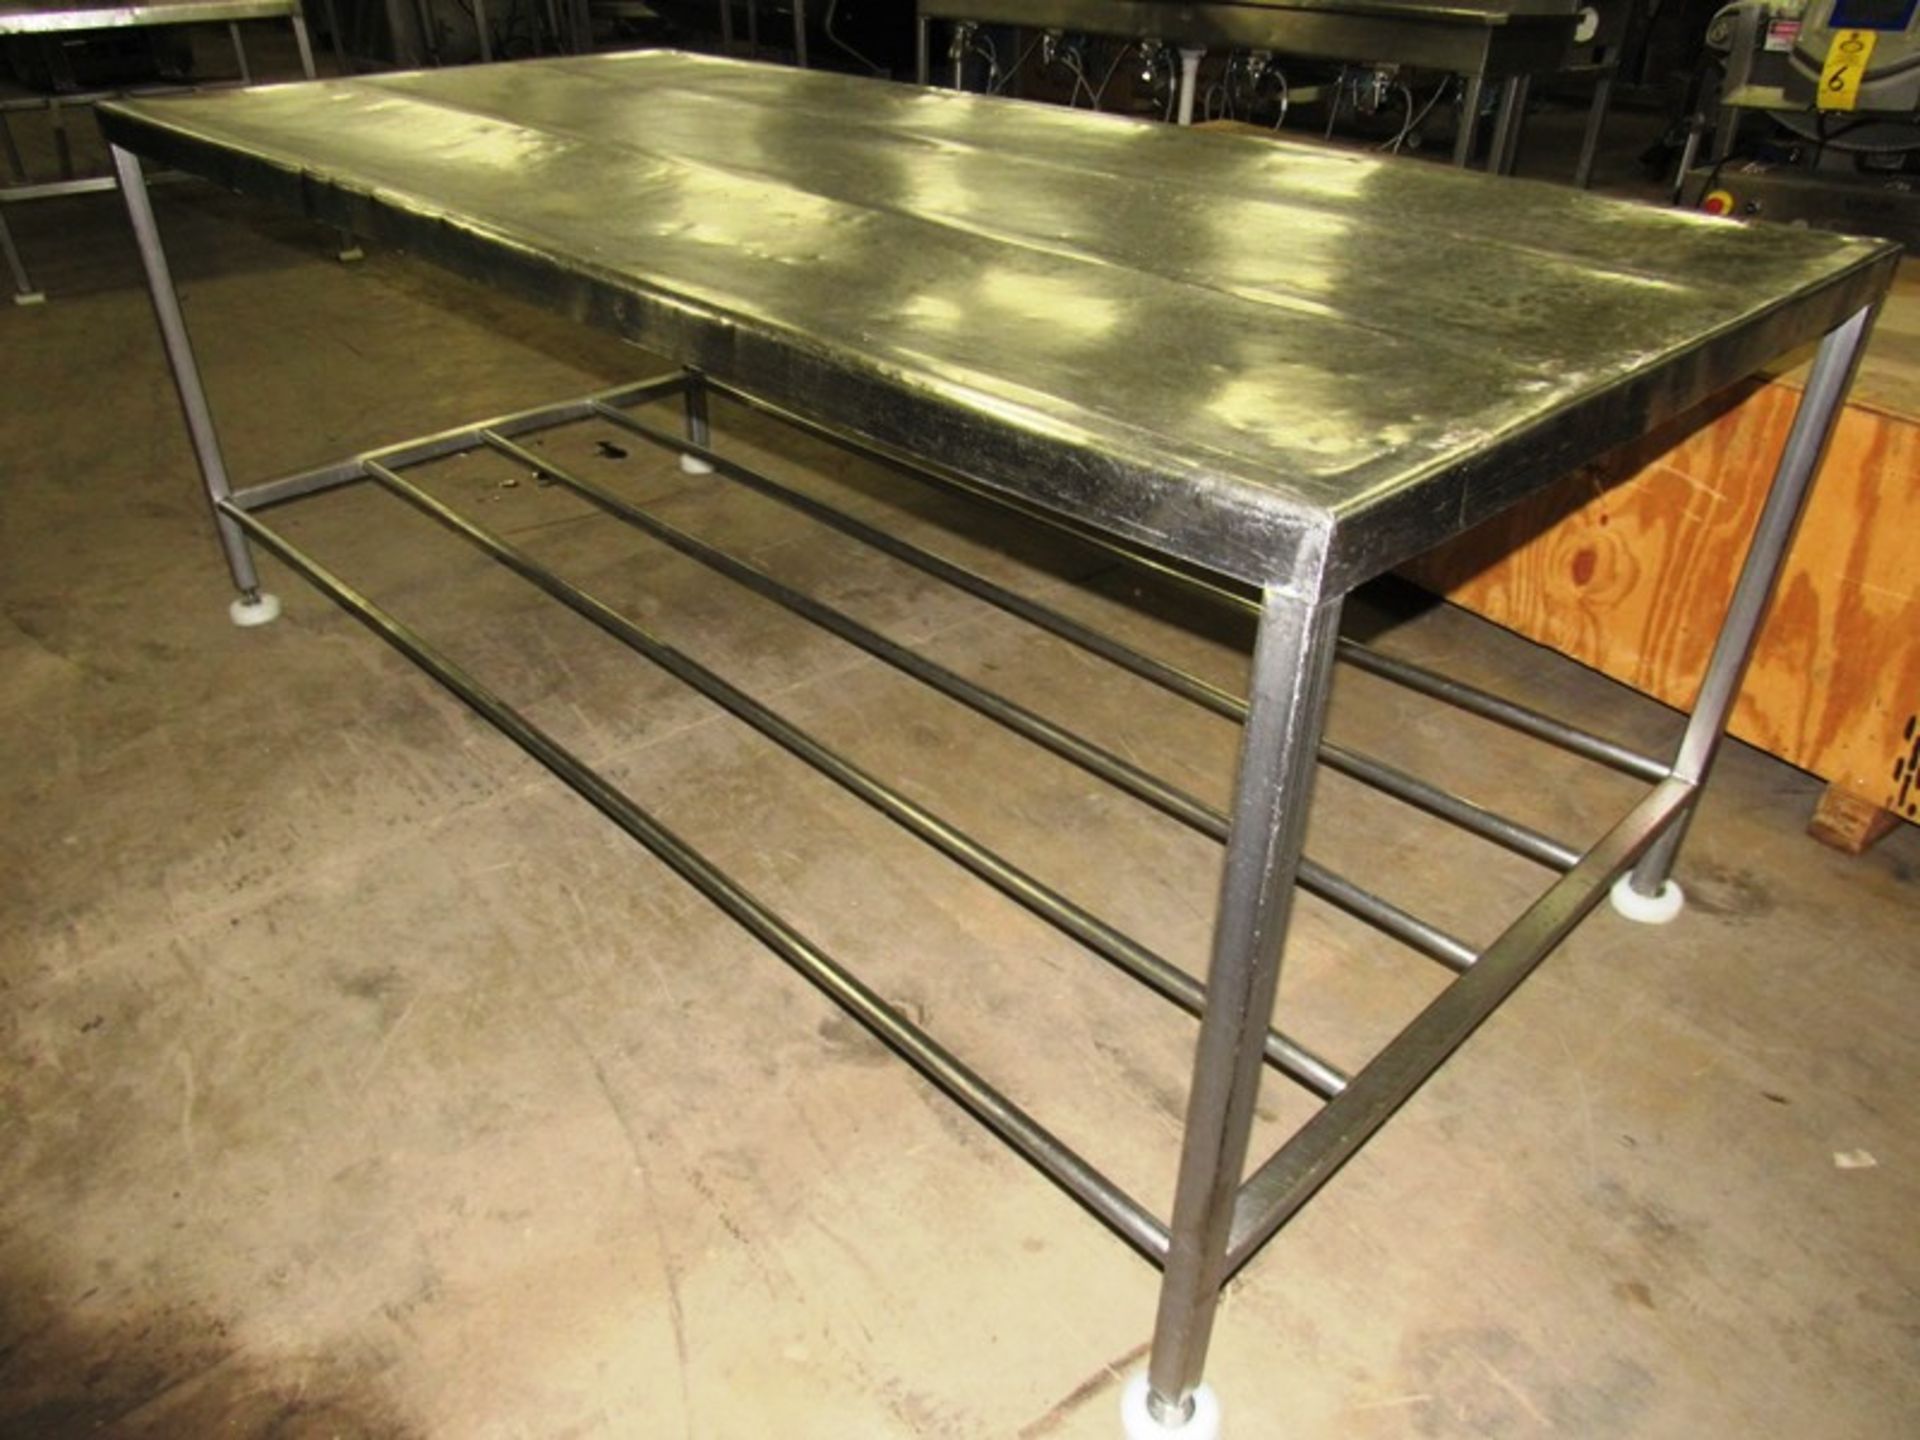 Stainless Steel Table, 45" W X 93" L X 36" T - Image 2 of 2